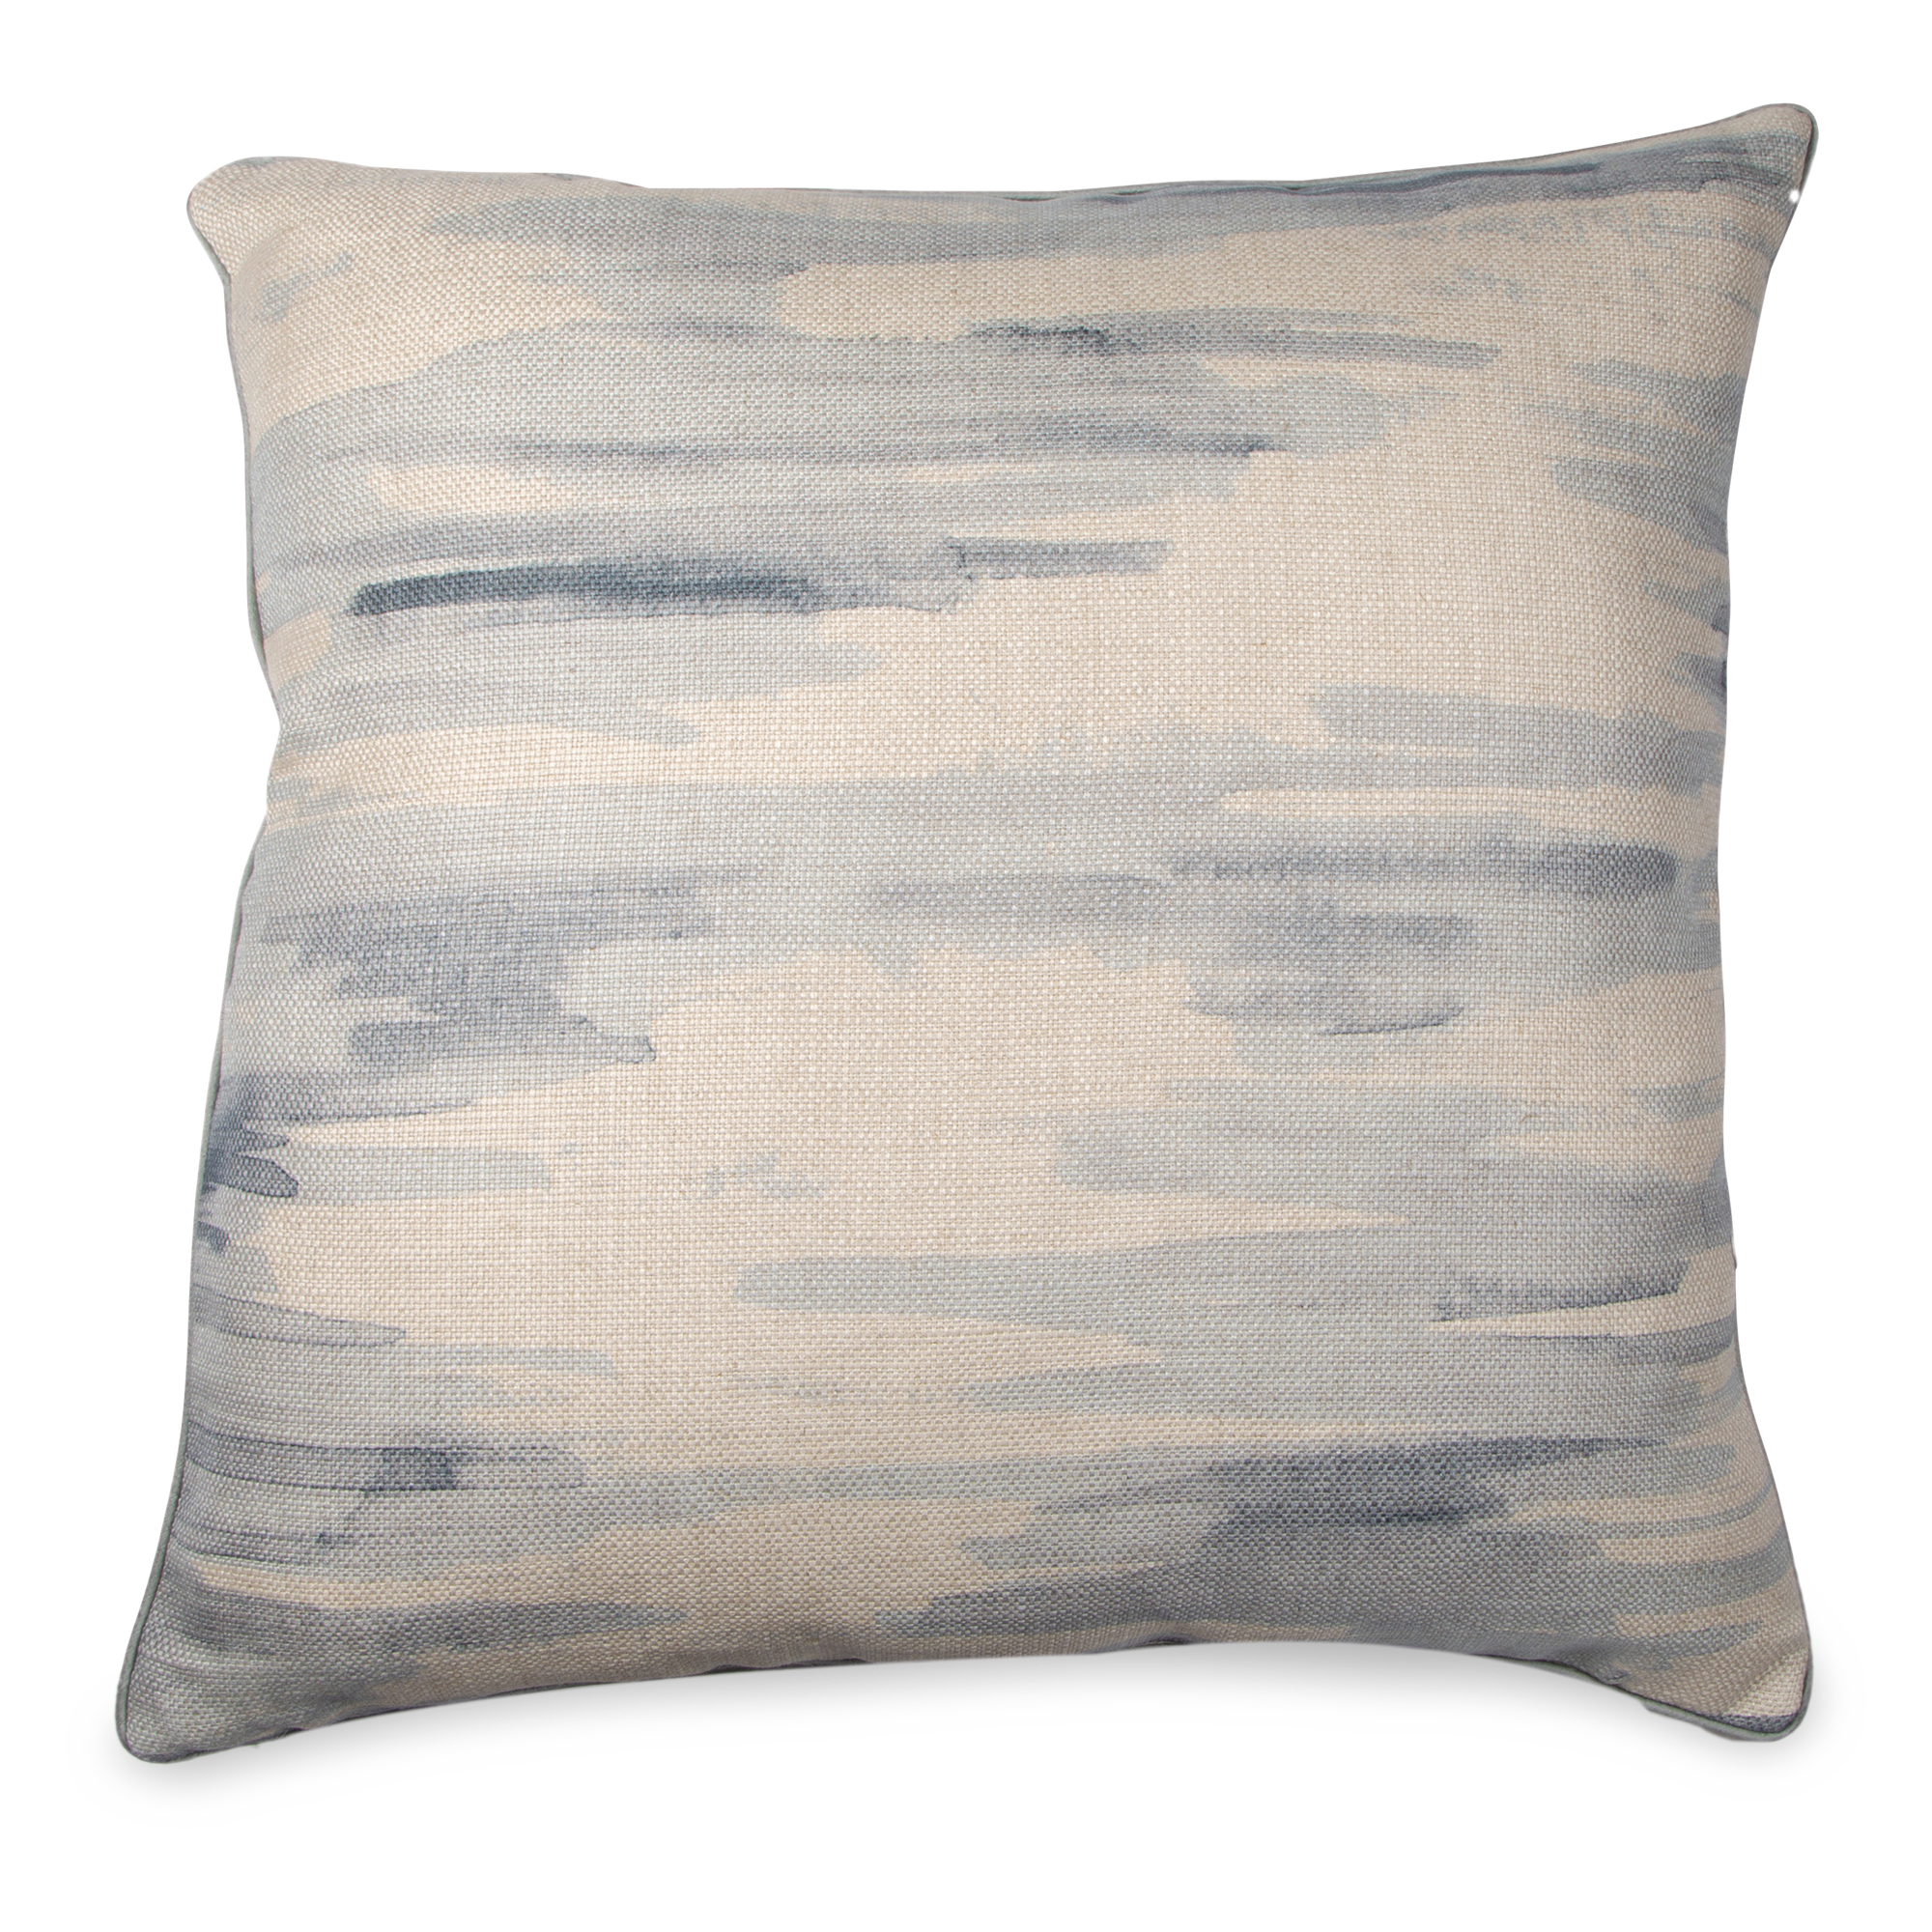 The Watermark Pillow features an abstract watercolour print on heavyweight linen.